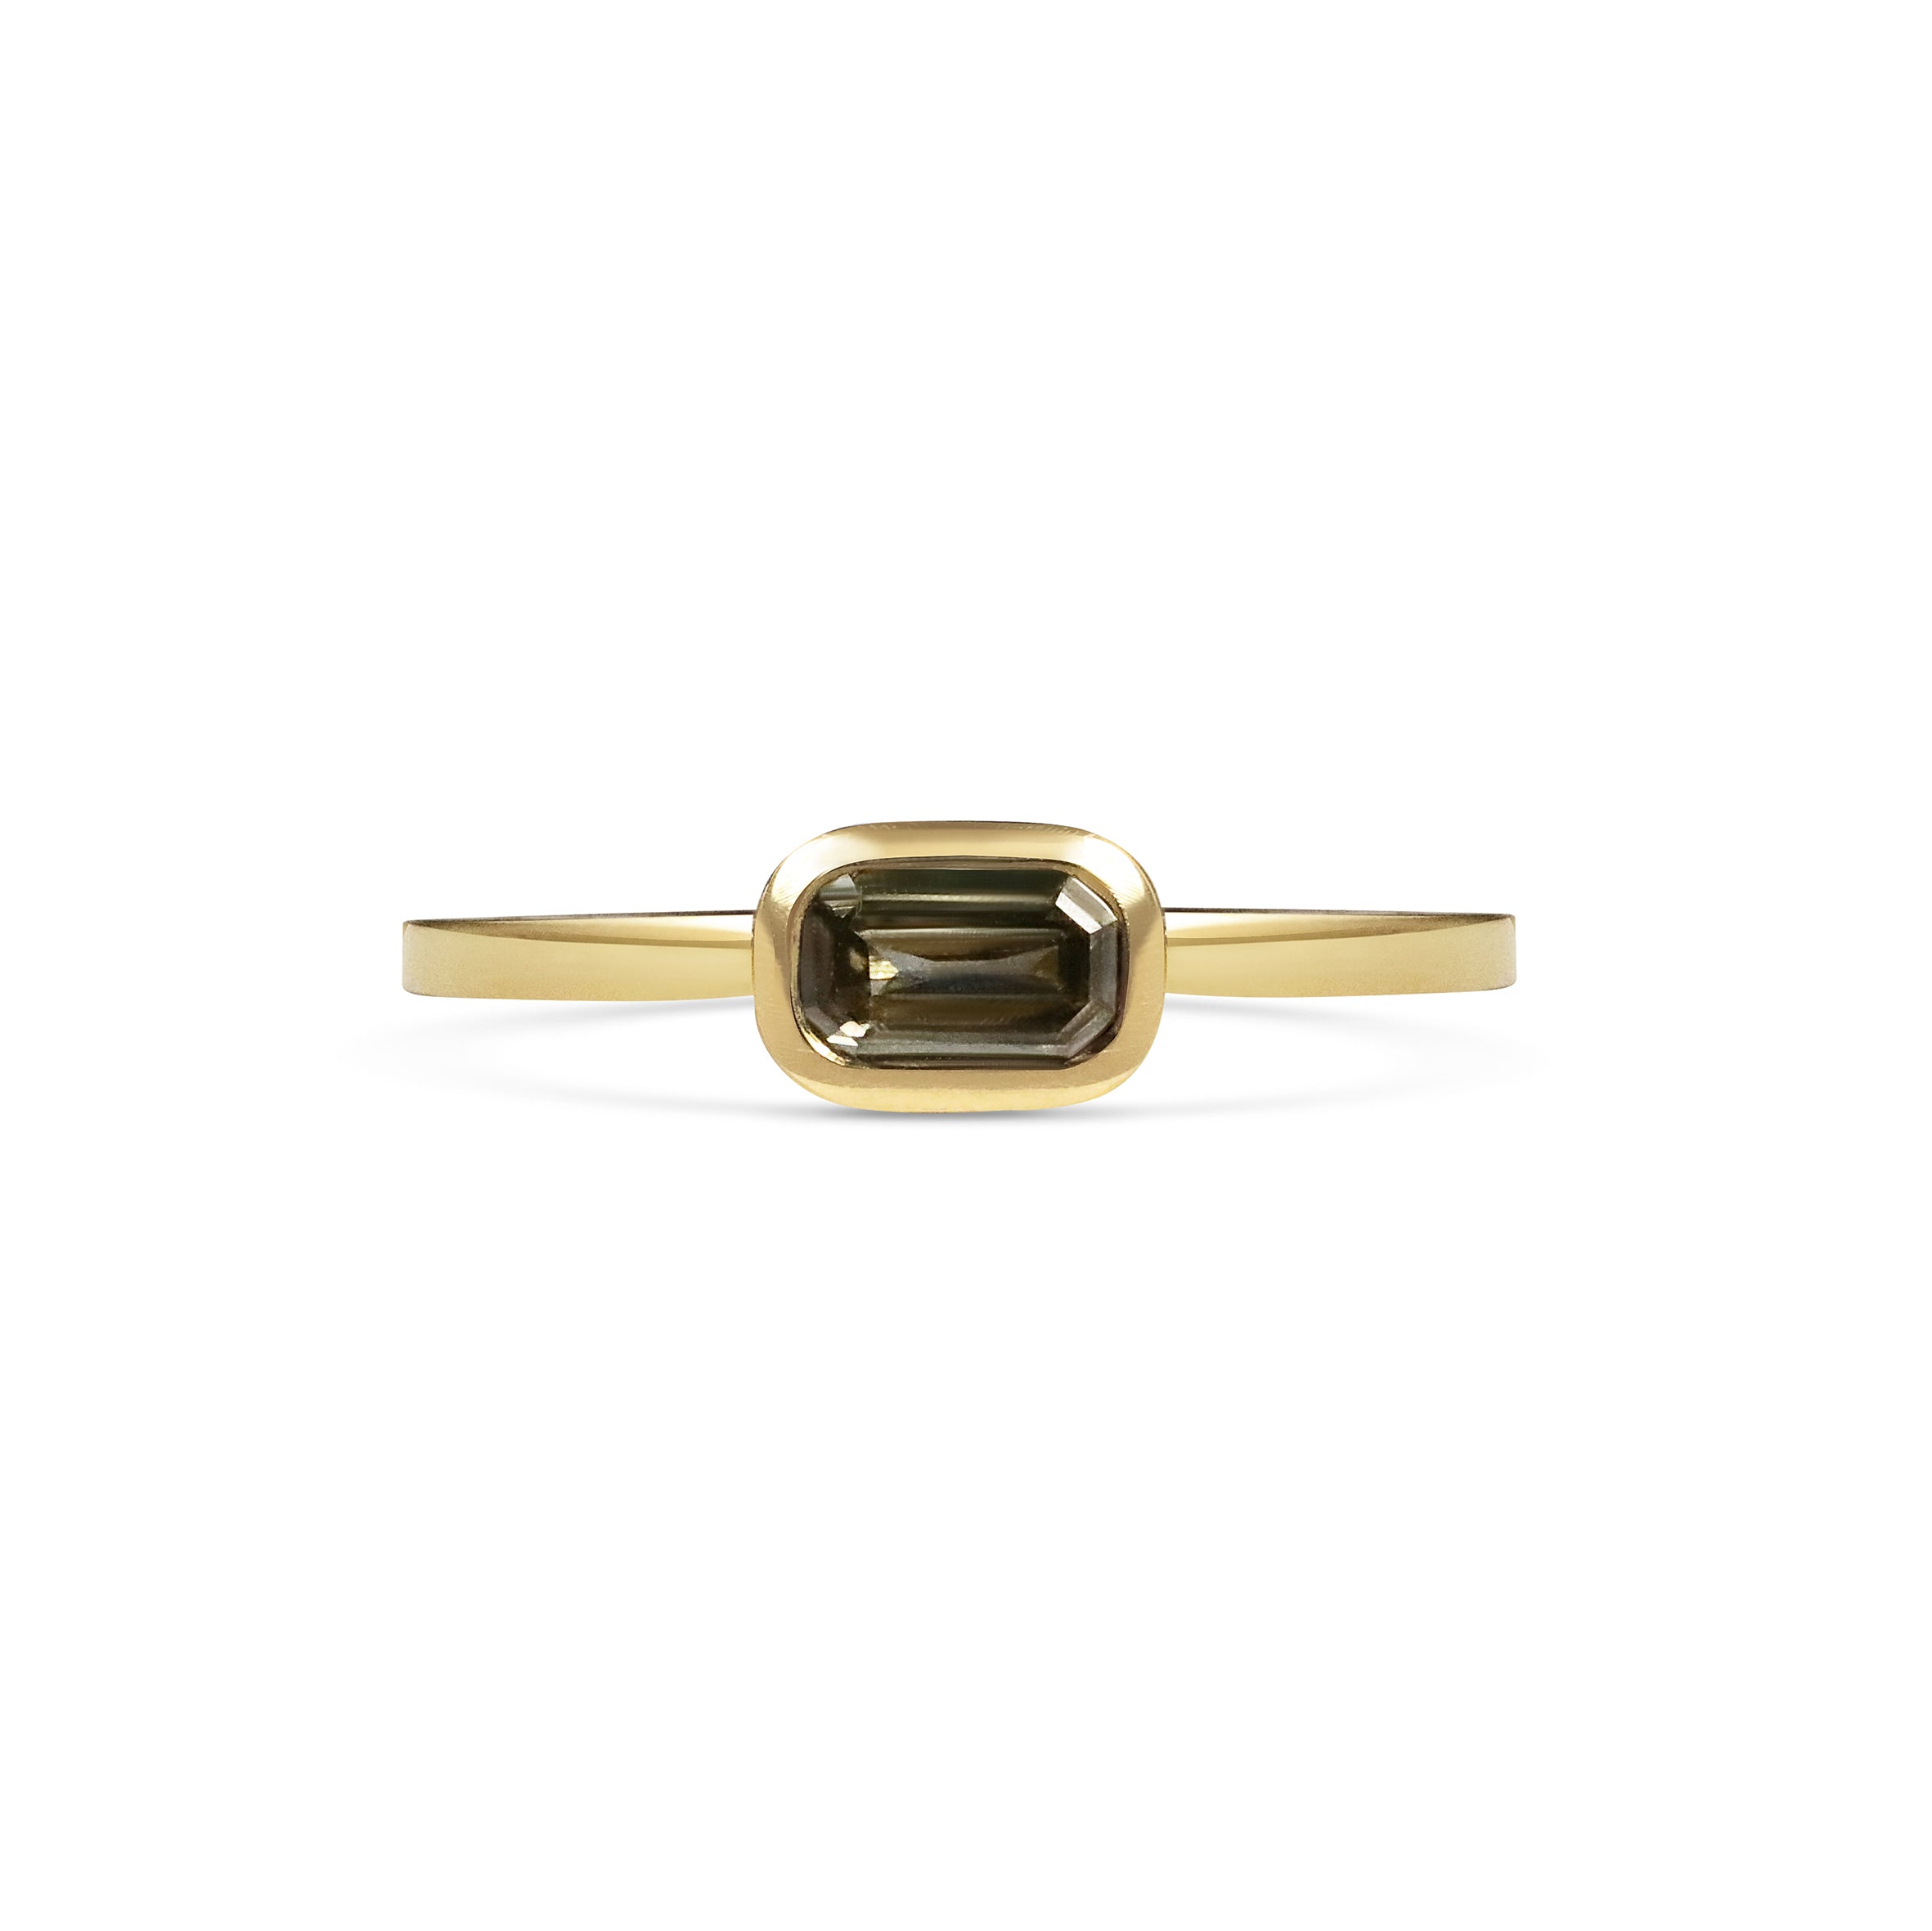 The Riviere Ring by East London jeweller Rachel Boston | Discover our collections of unique and timeless engagement rings, wedding rings, and modern fine jewellery.